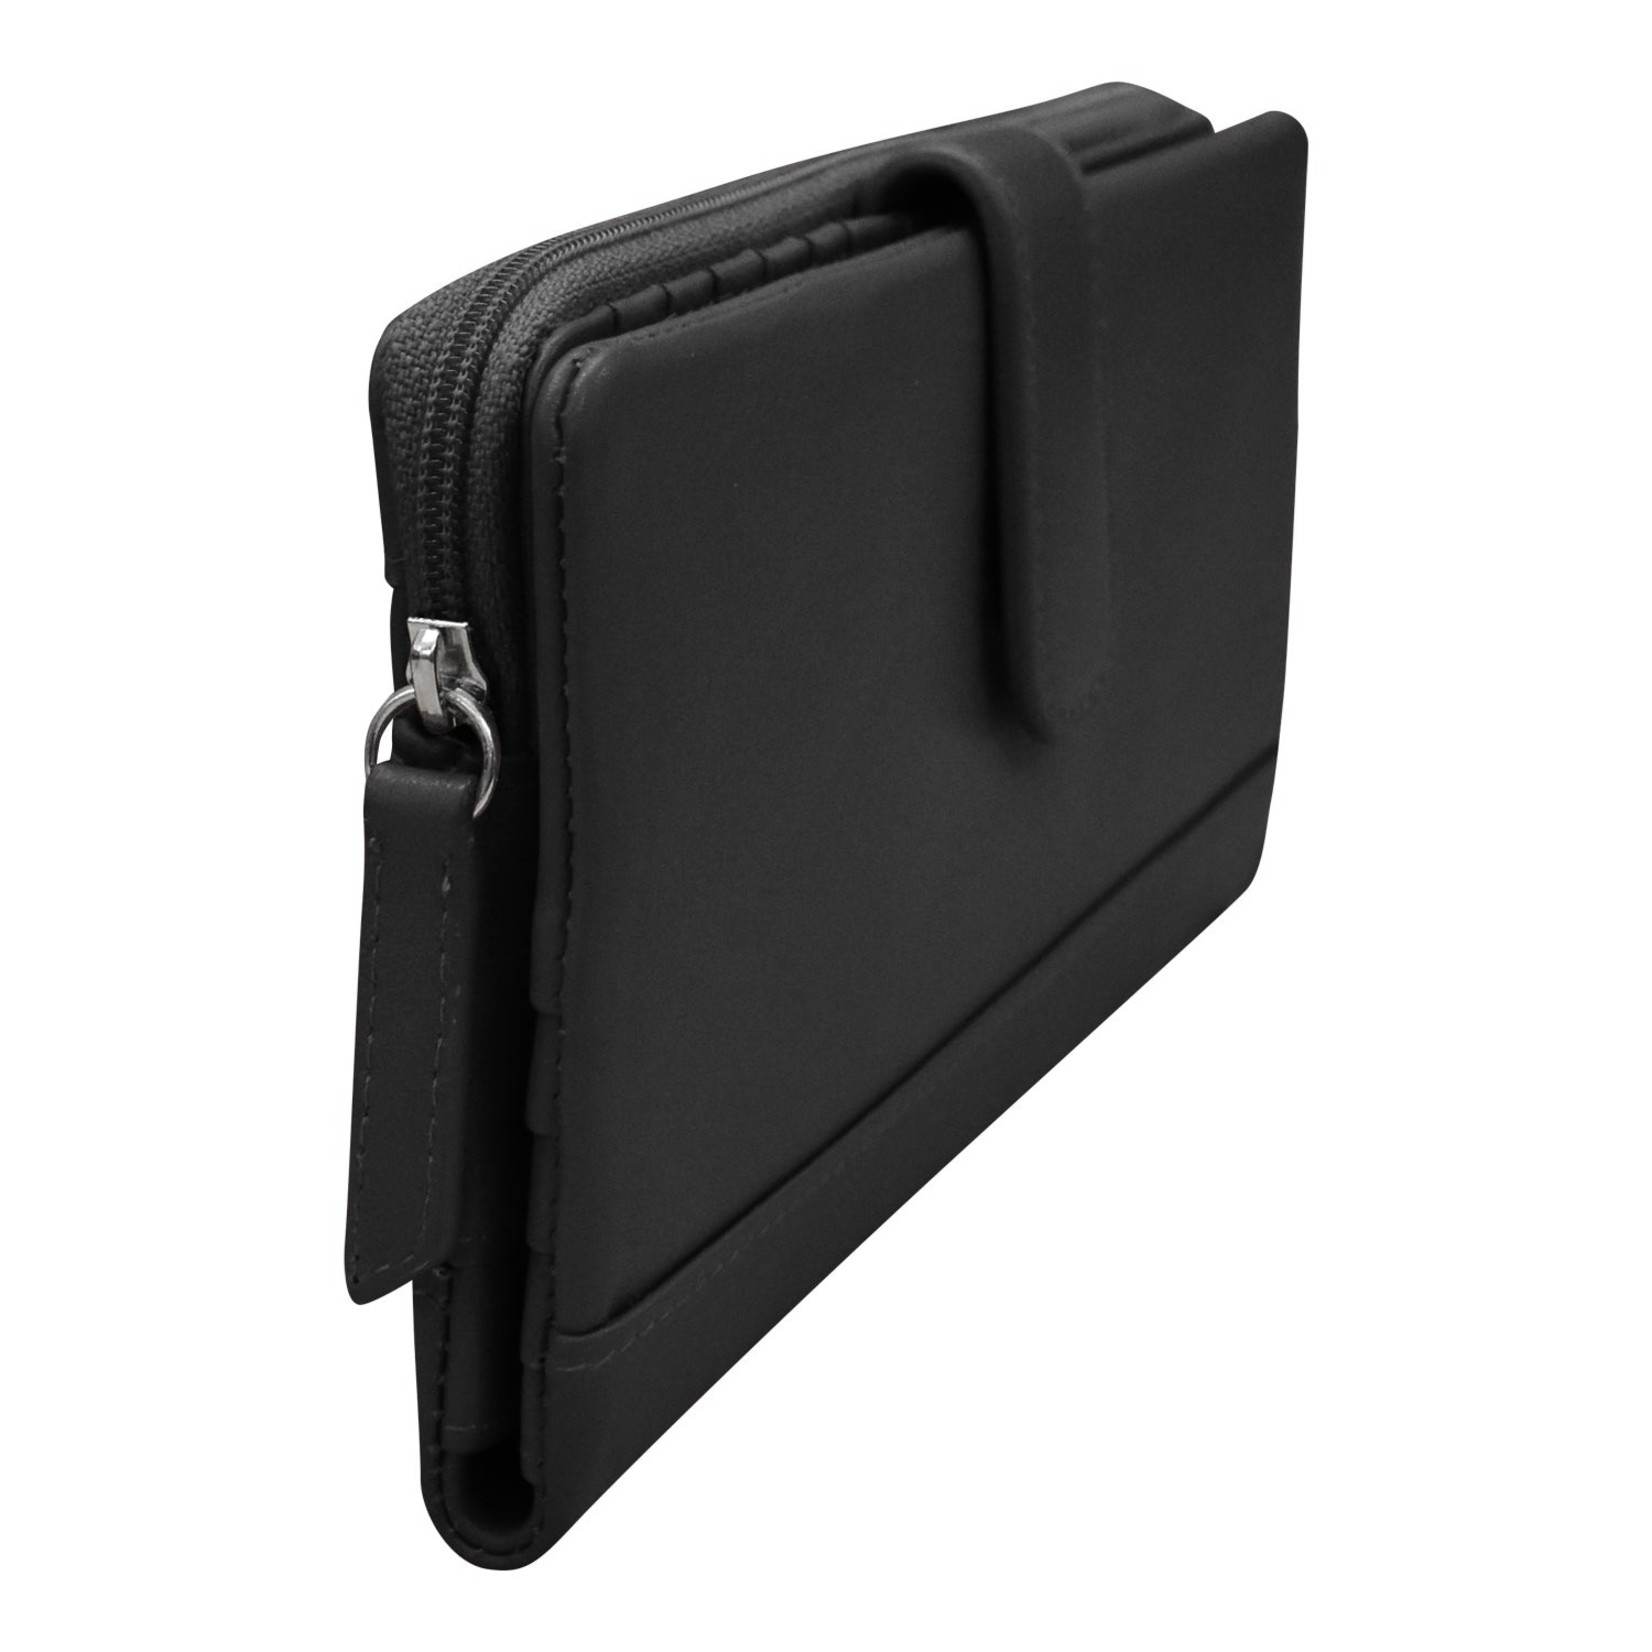 Leather Handbags and Accessories 7420 Black - RFID Smartphone Wallet